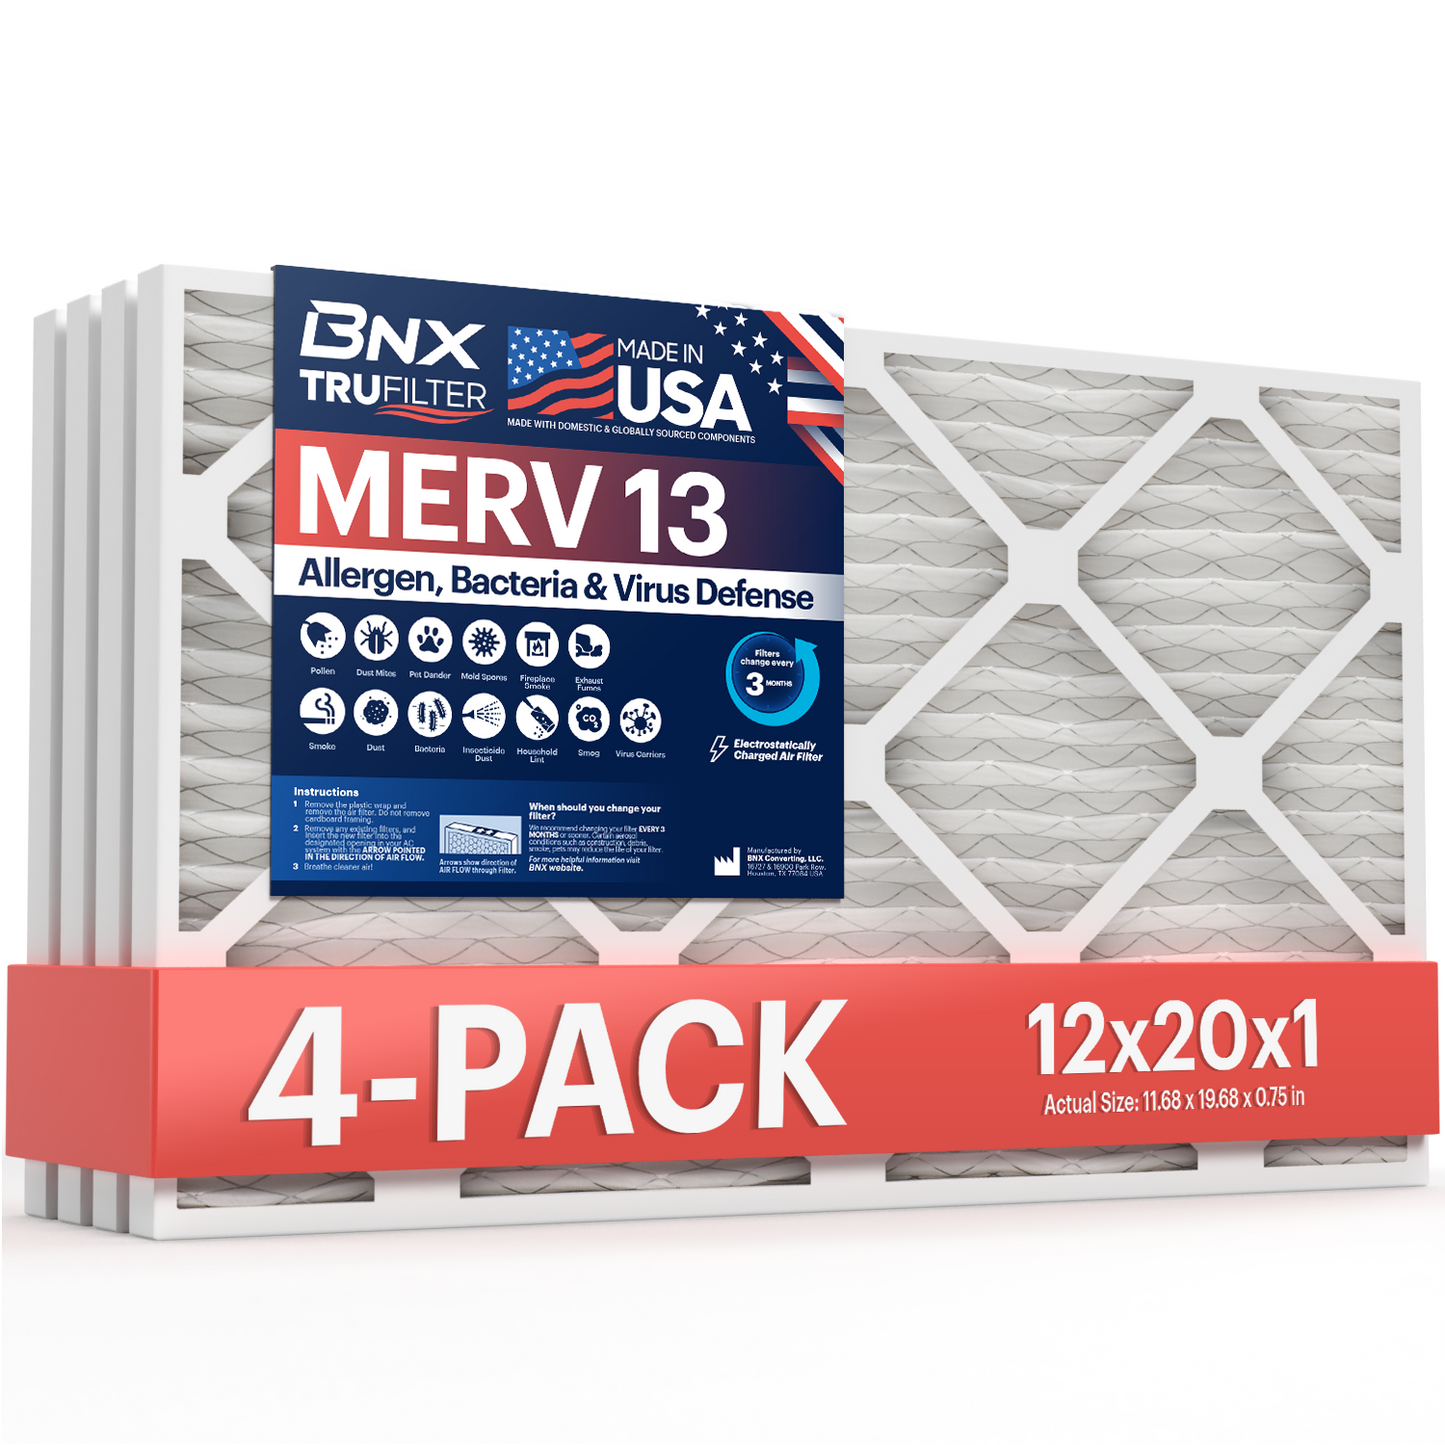 BNX TruFilter 12x20x1 MERV 13 Pleated Air Filter – Made in USA (4-Pack)